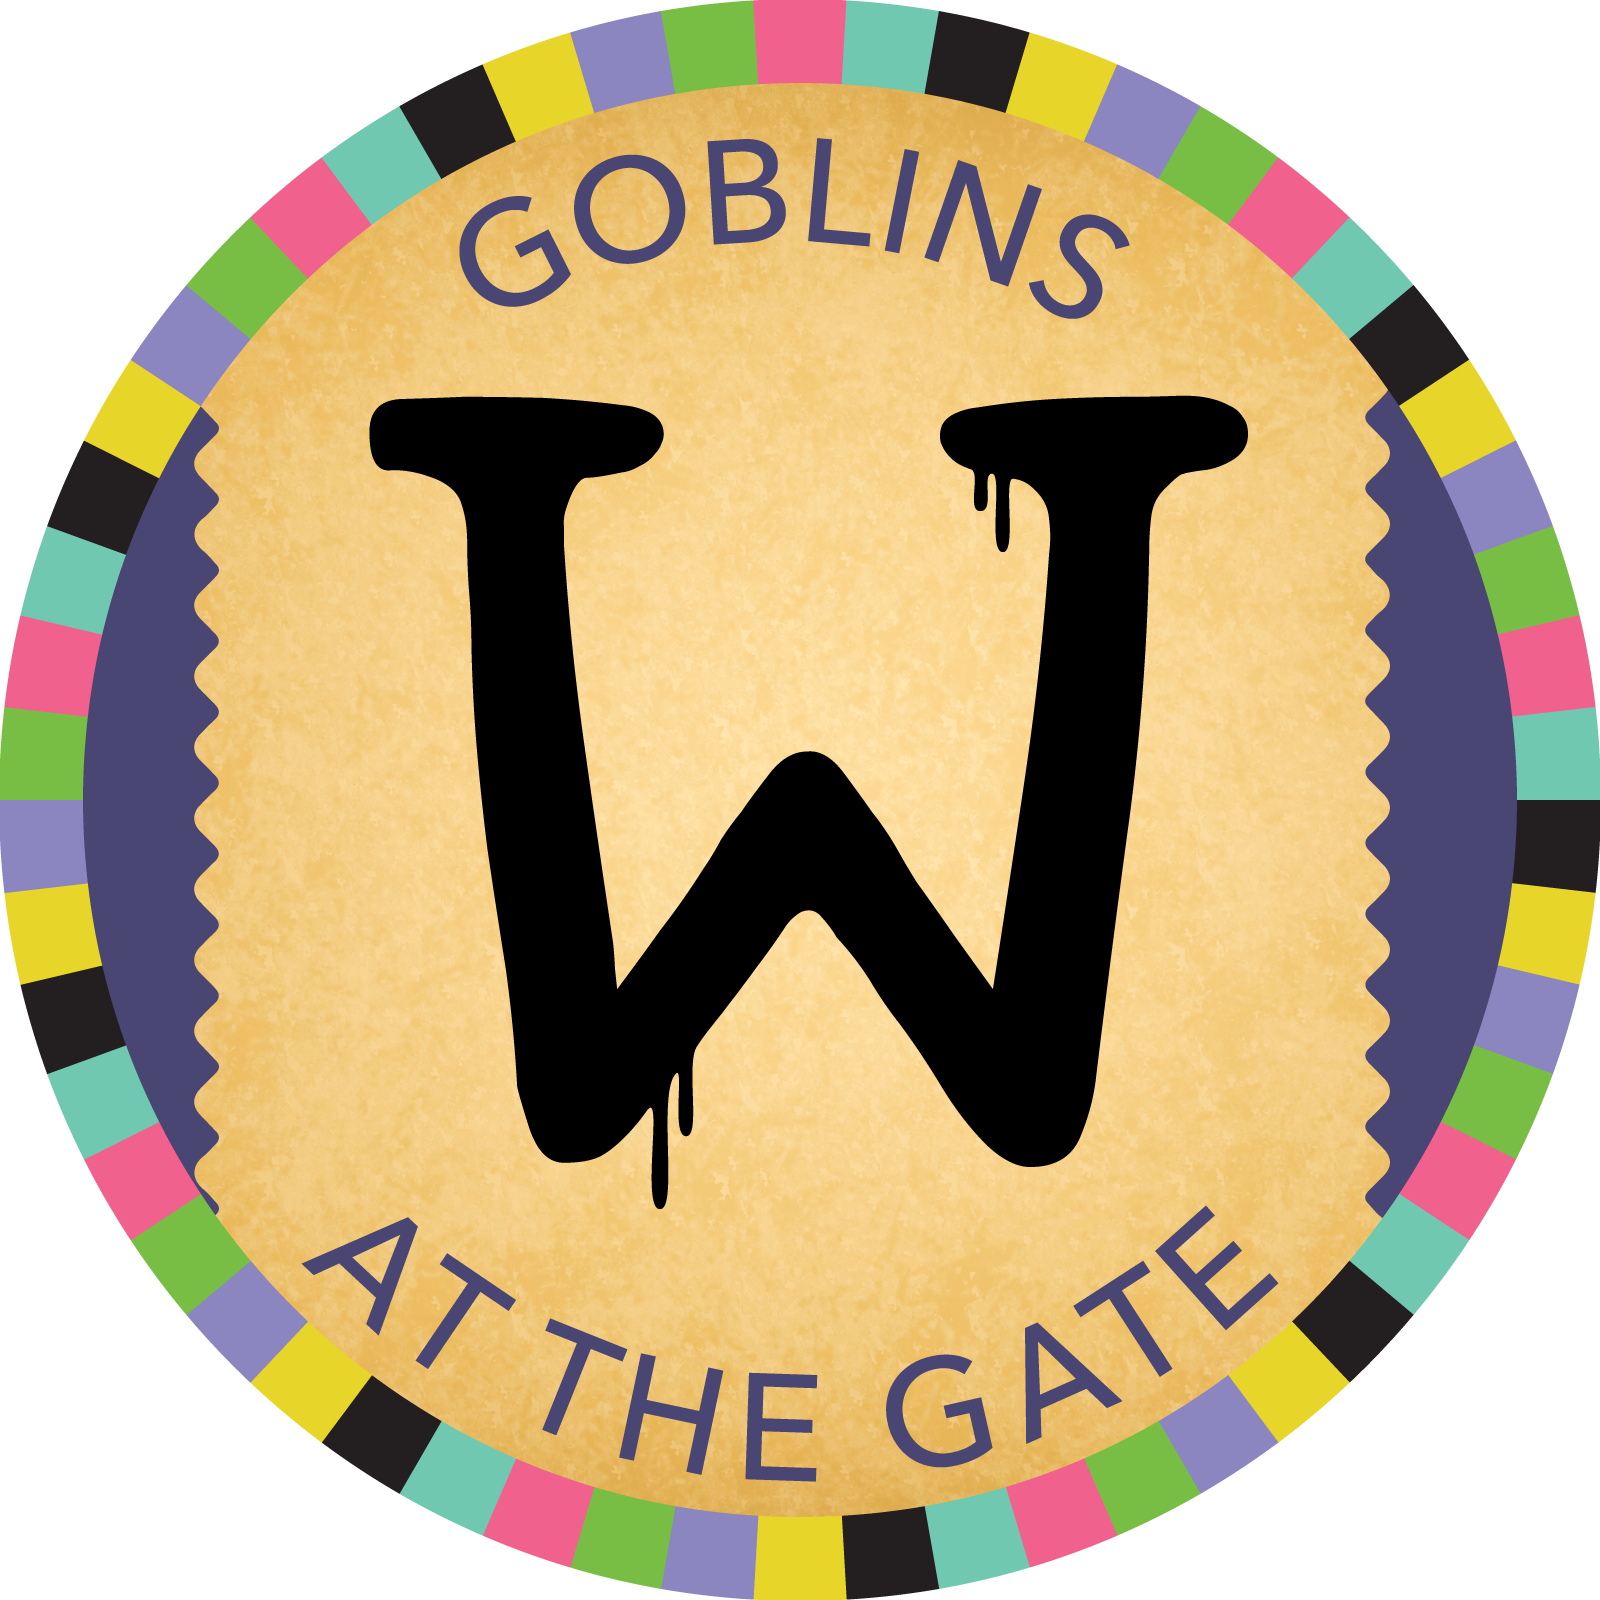 Goblins At The Gate Image - Goblins At The Gate Image (1600x1600)